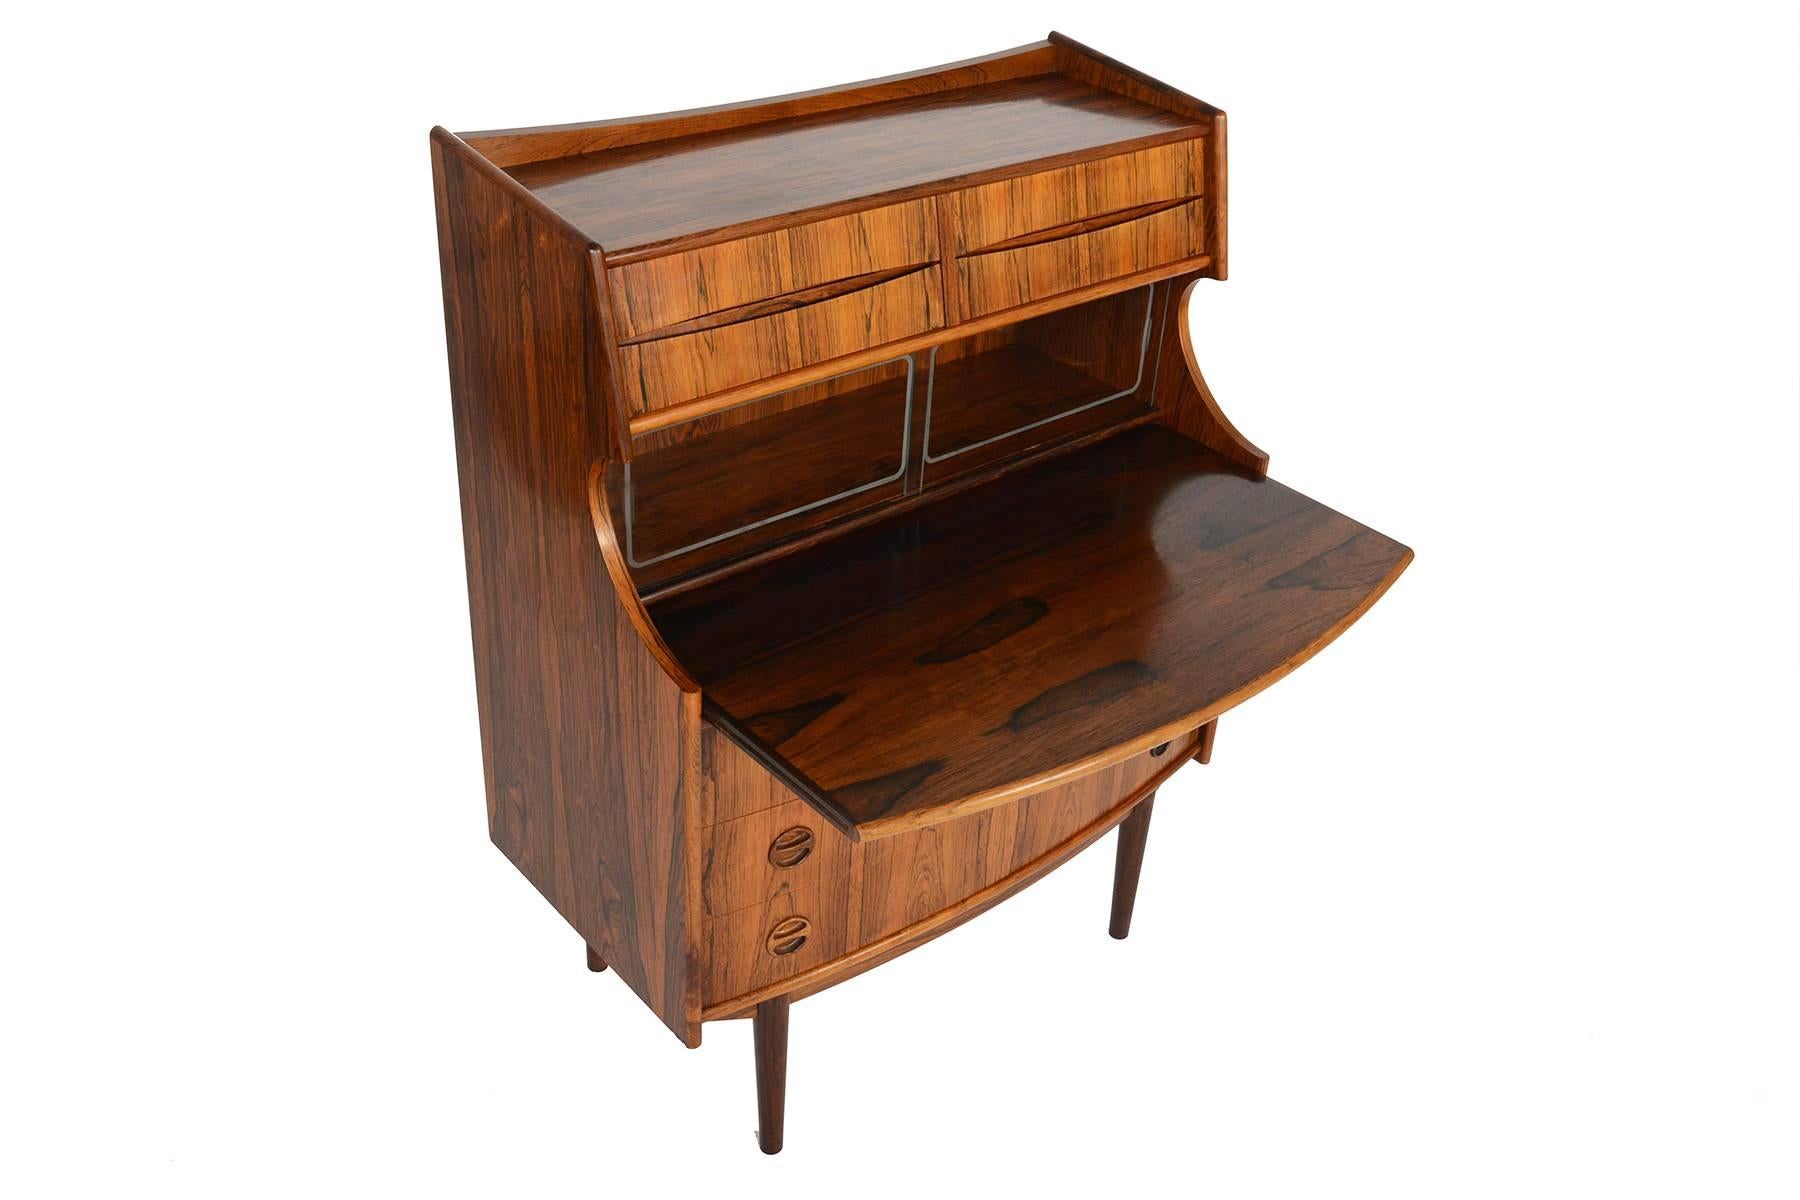 This incredible Danish modern secretary desk by Falsigs Møbelfabrik in rosewood hails straight from the 1960s! The centre of this piece features a pullout desk and provides a spacious work surface. Two etched glass doors sit above. Four small upper